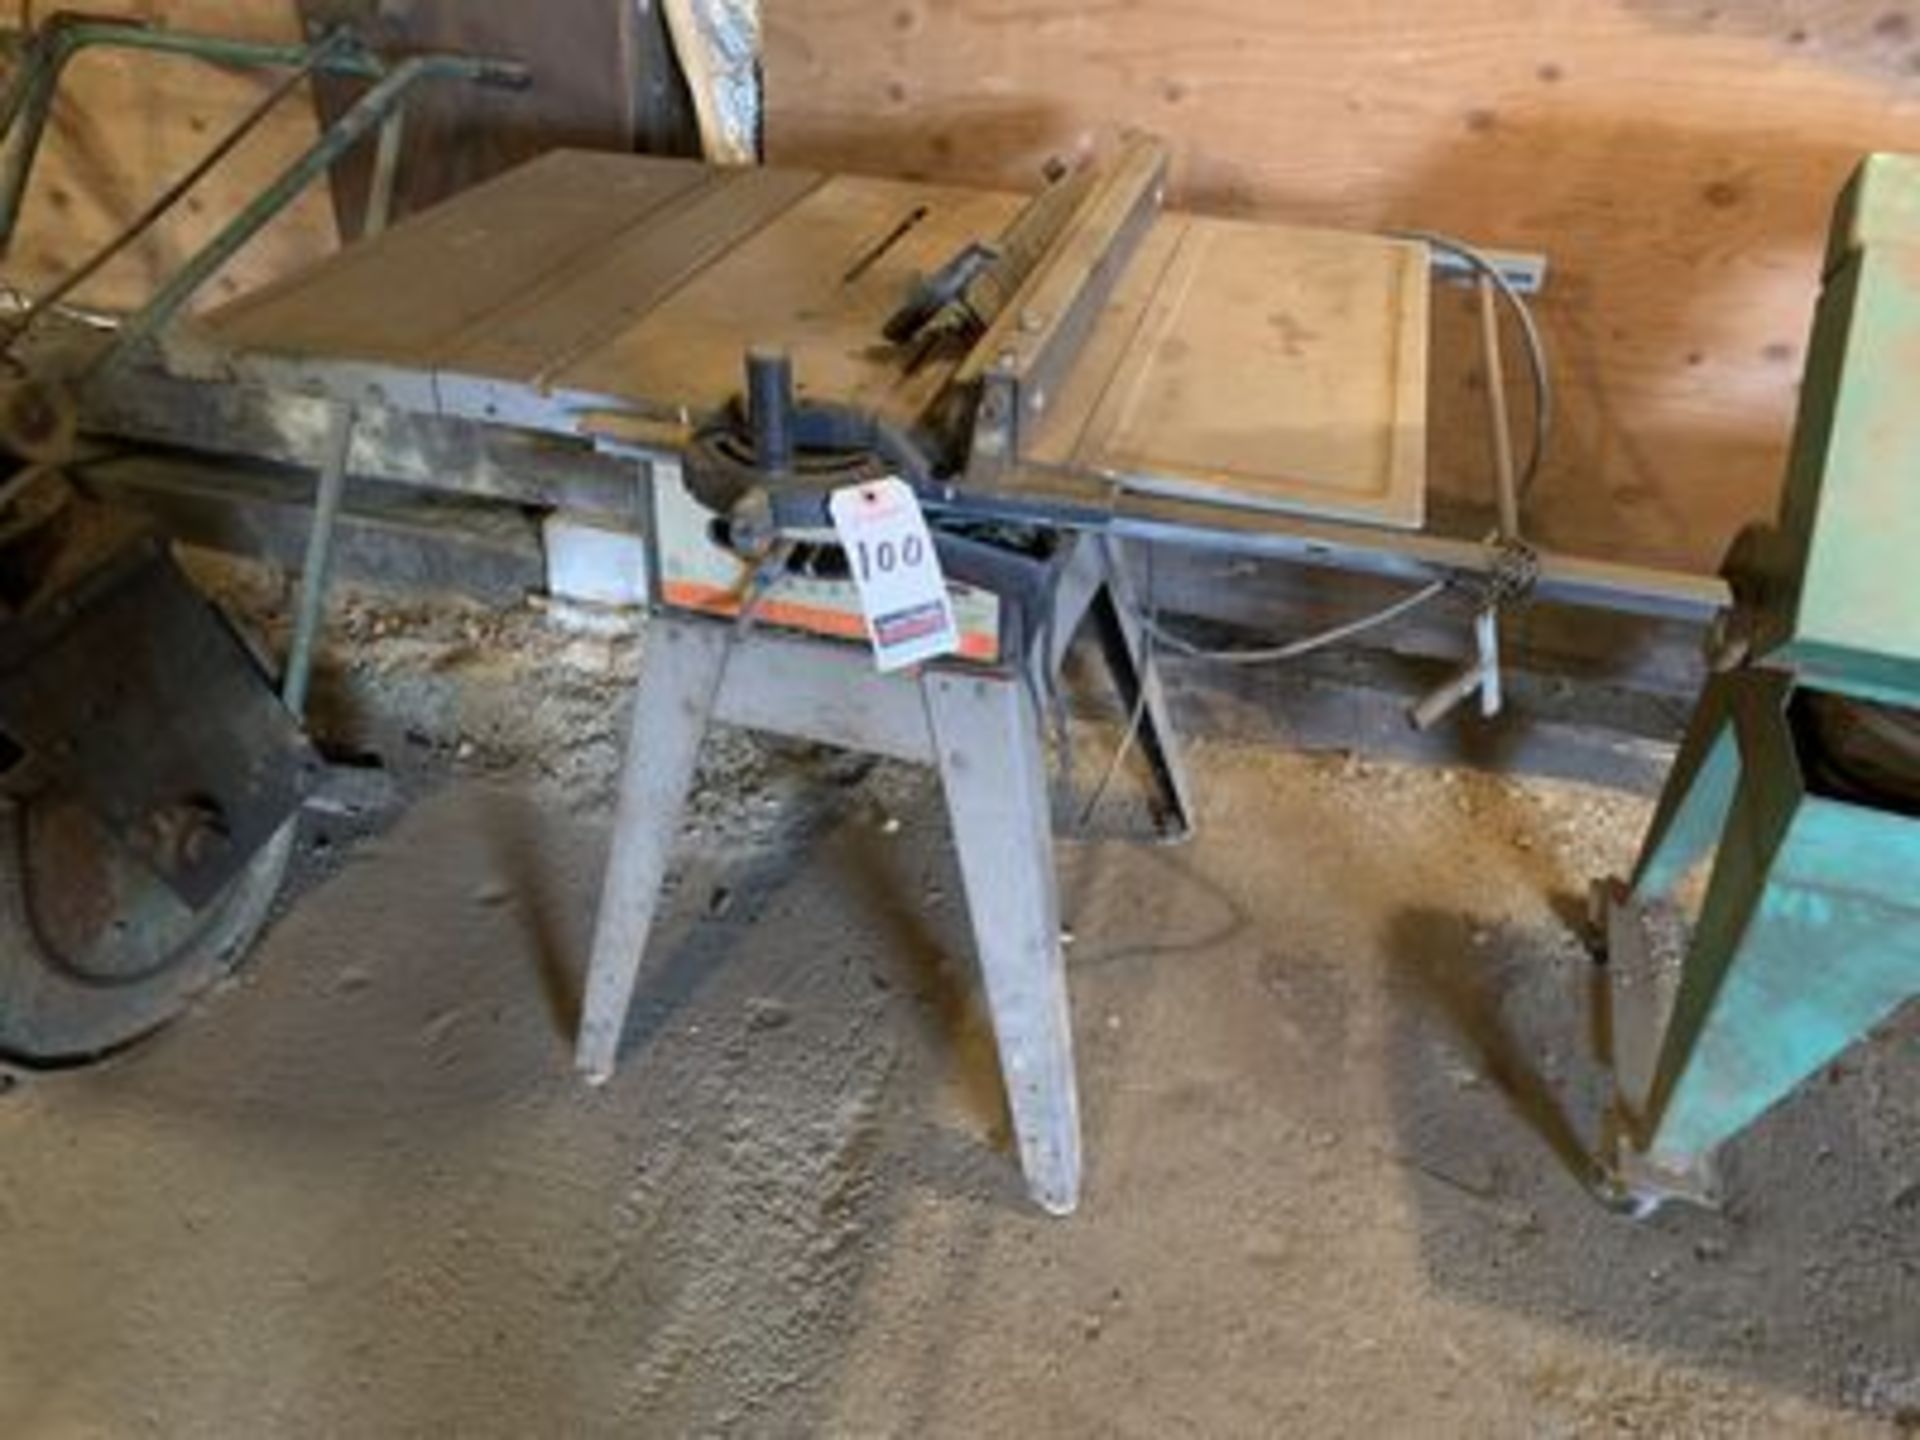 CRAFTSMAN 10" TABLE SAW, 1 PH. W/ STAND